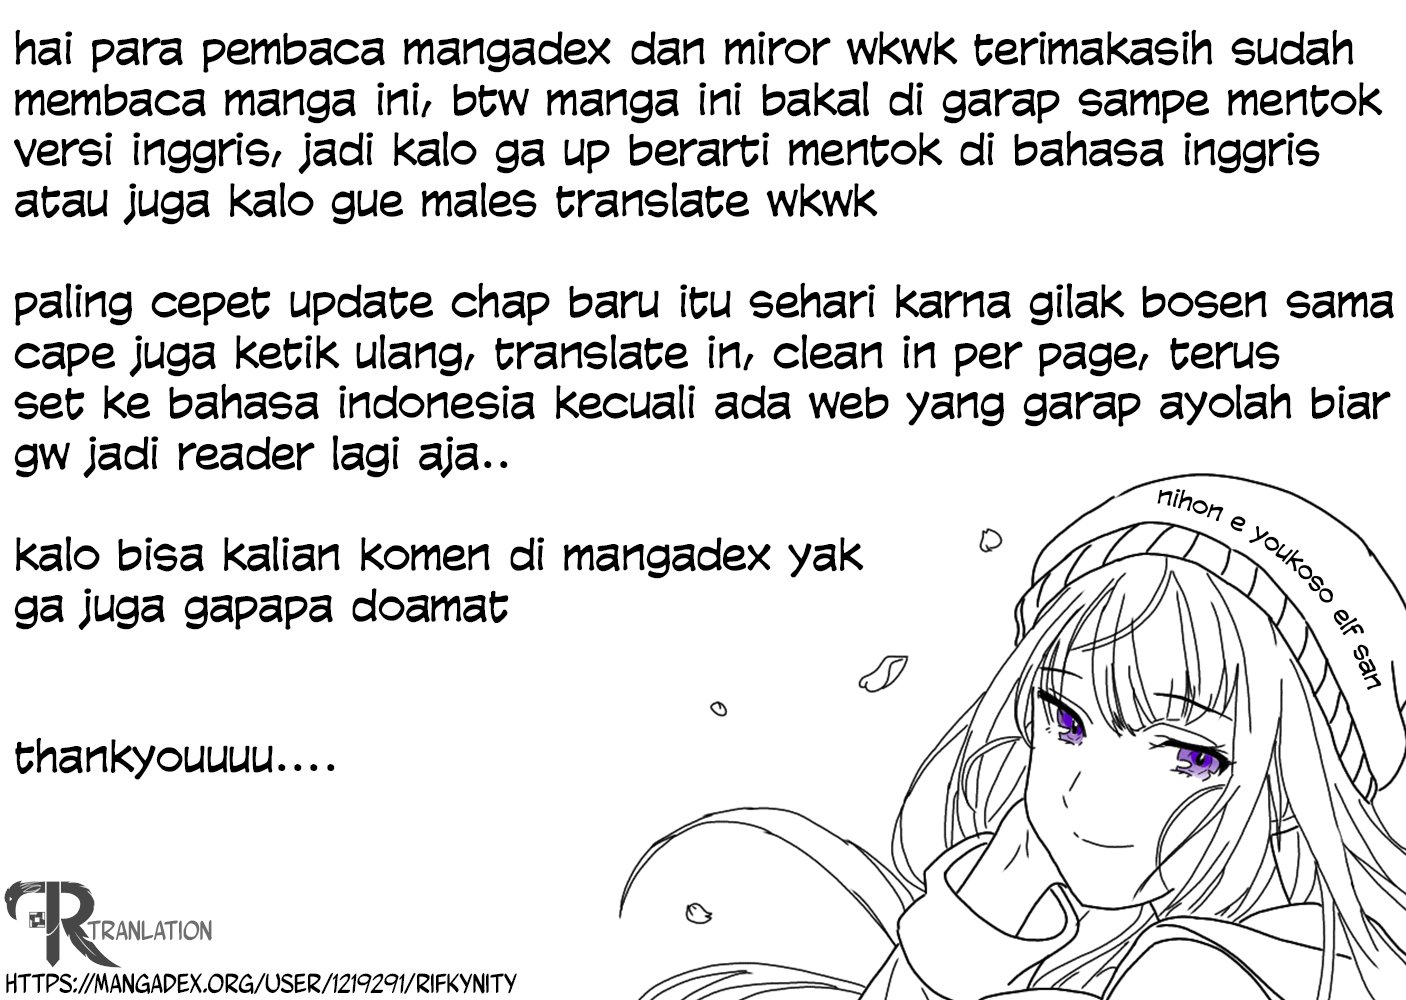 Milady Just Wants to Relax Chapter 02